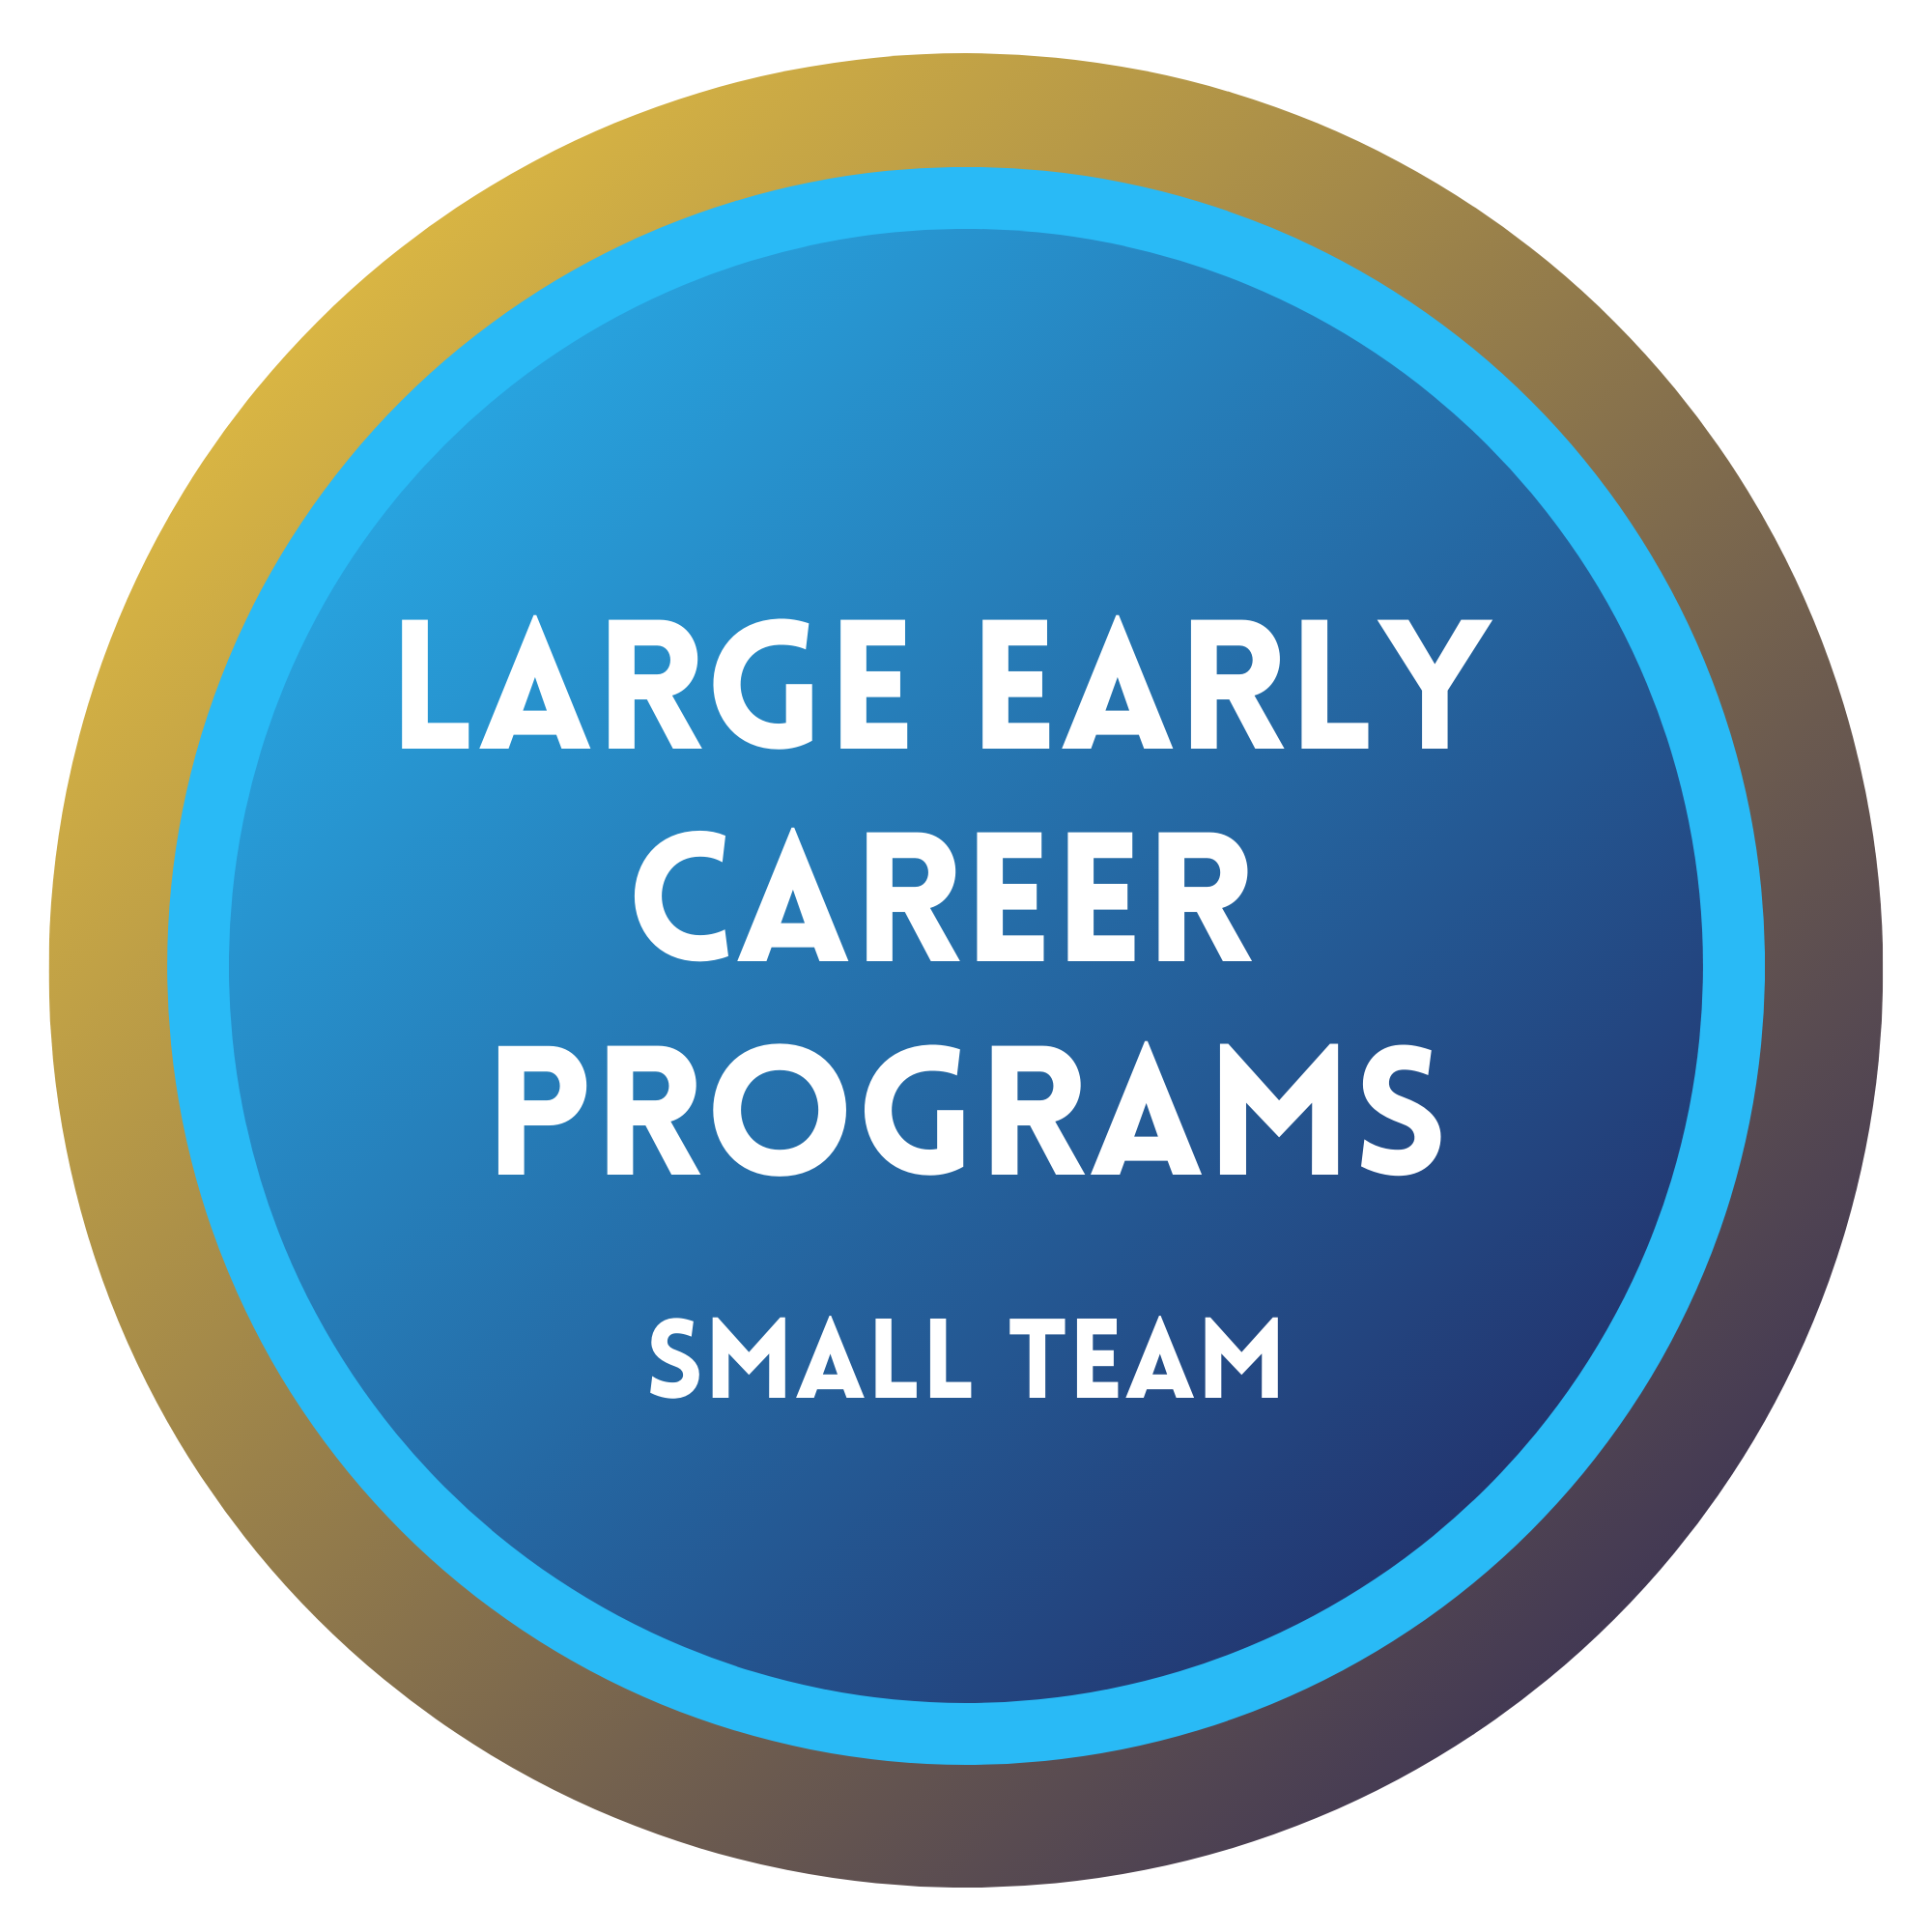 Large Early Career Programs, Small Team - Click to View